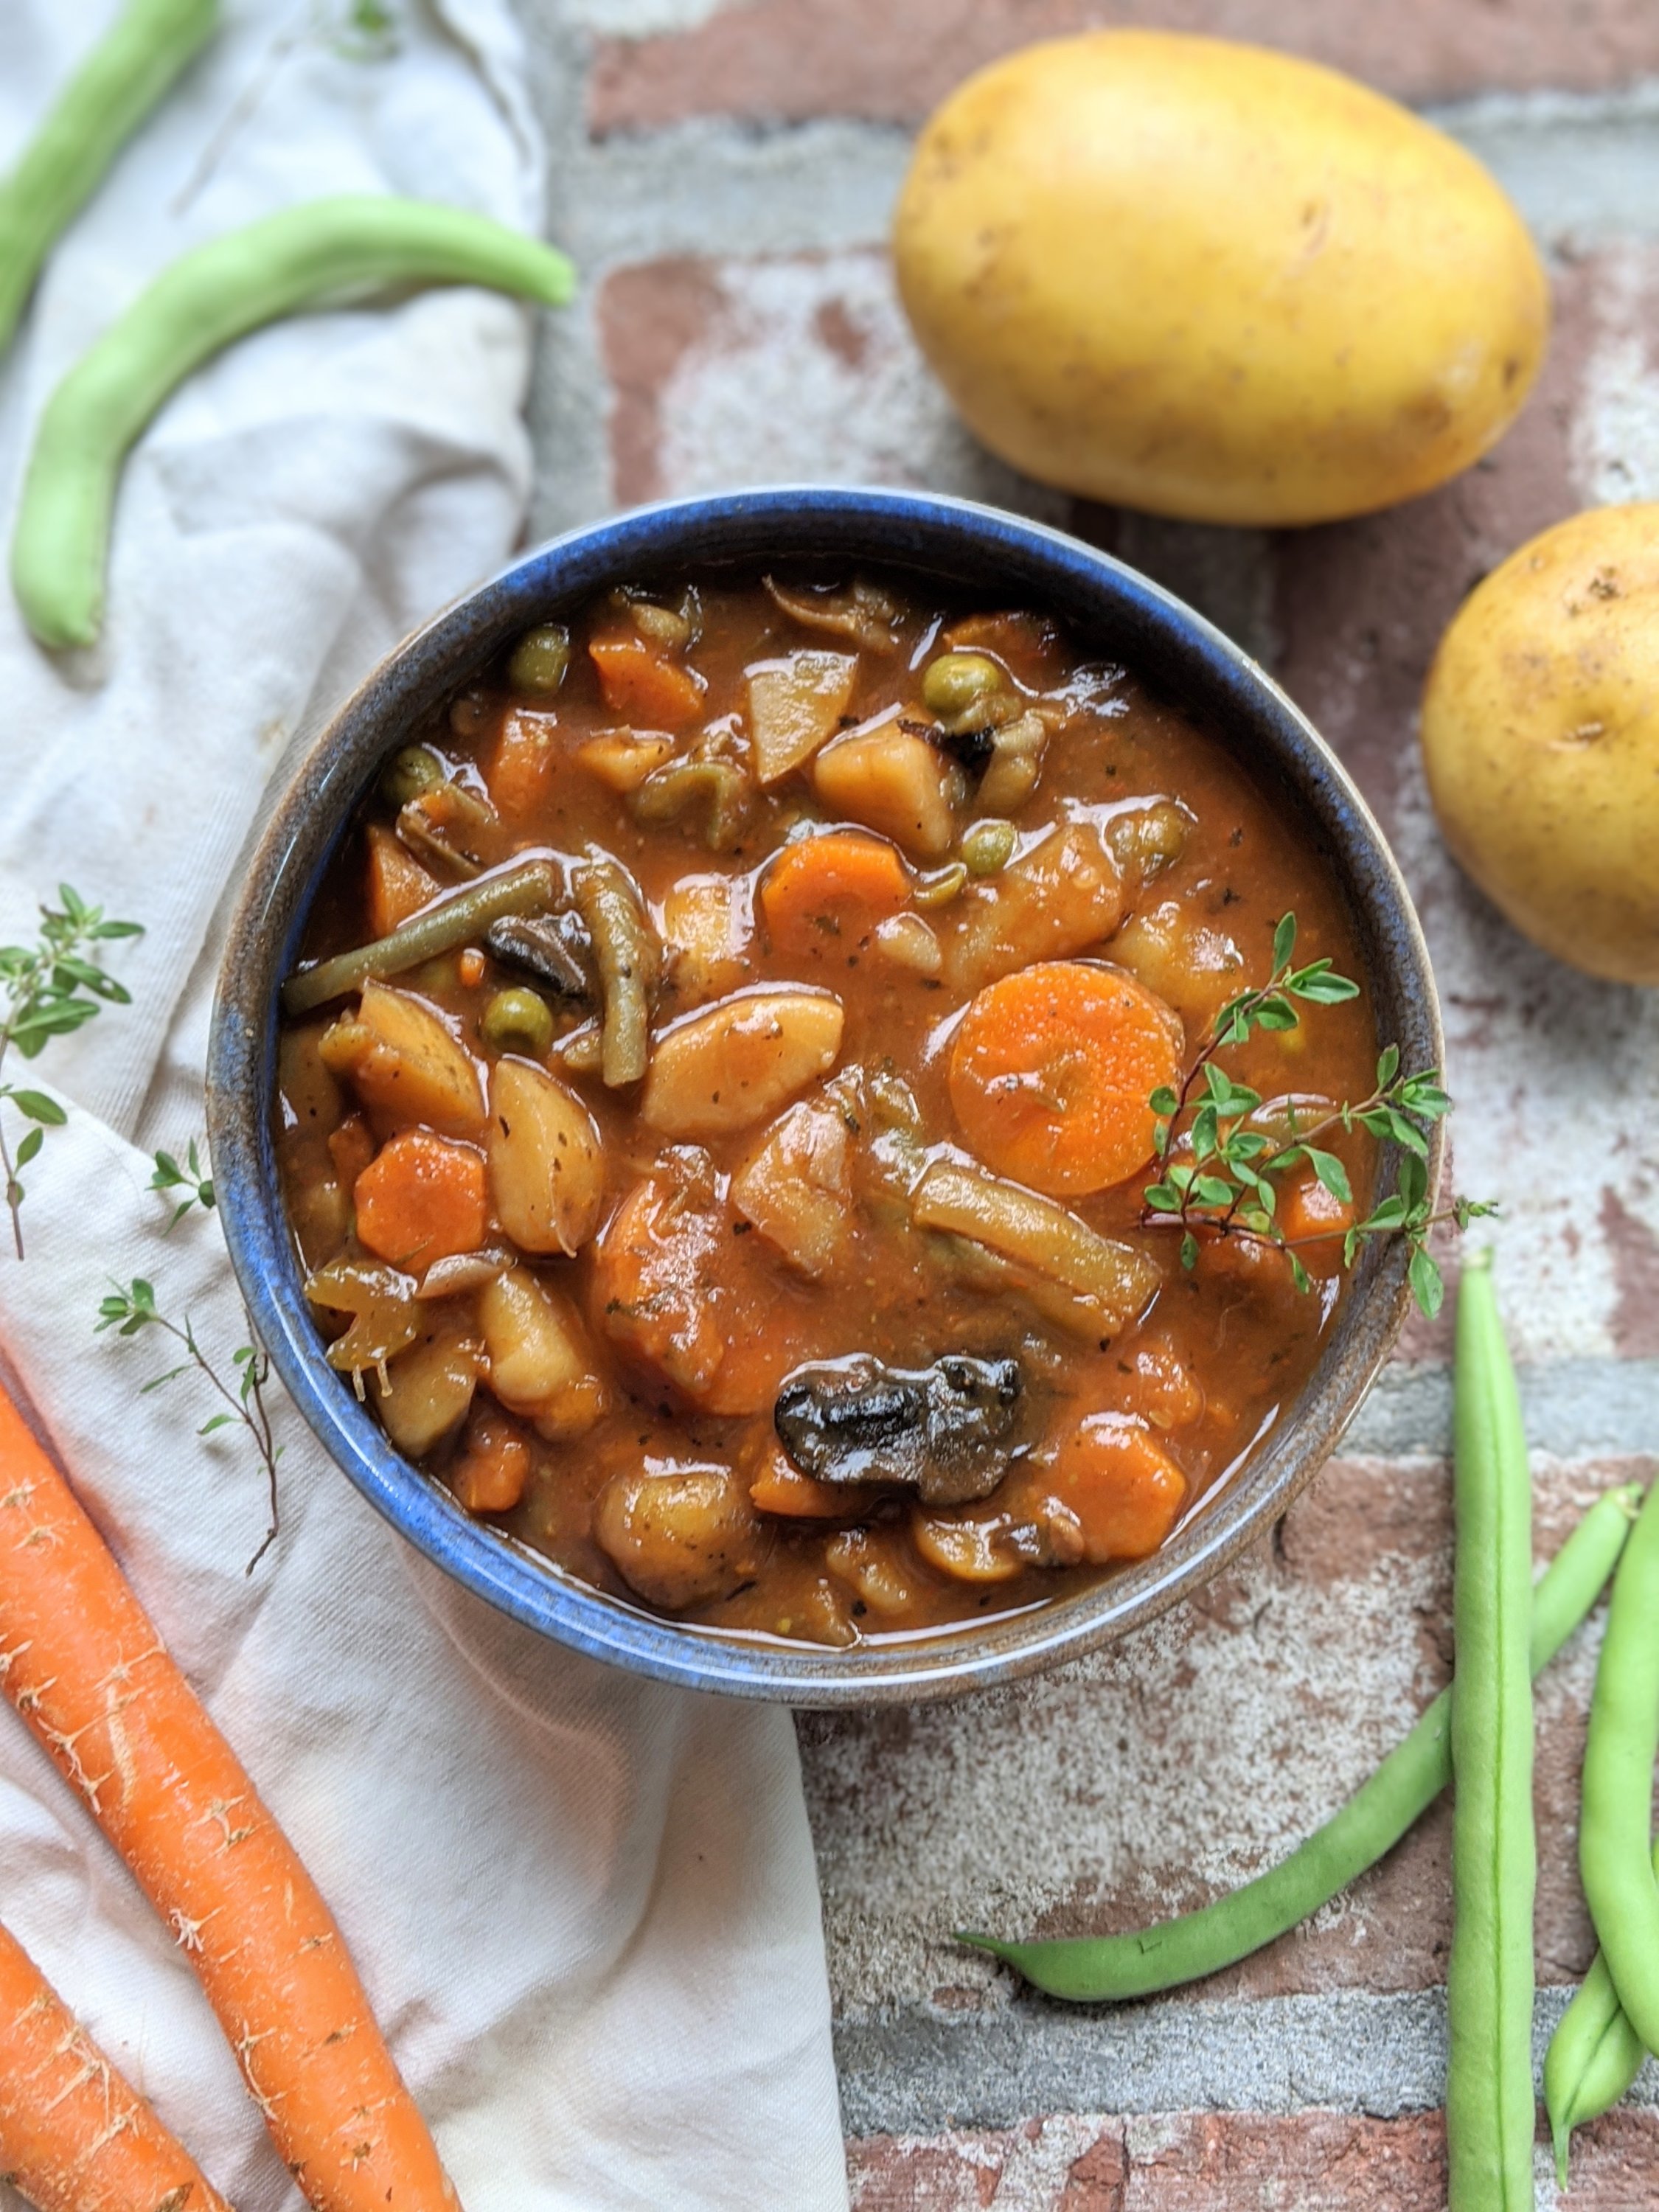 healthy filling vegan stew recipes with potatoes carrots green beans mushrooms herbs and spices hearty and satisfying vegan dinners for families to keep you full veganuary 